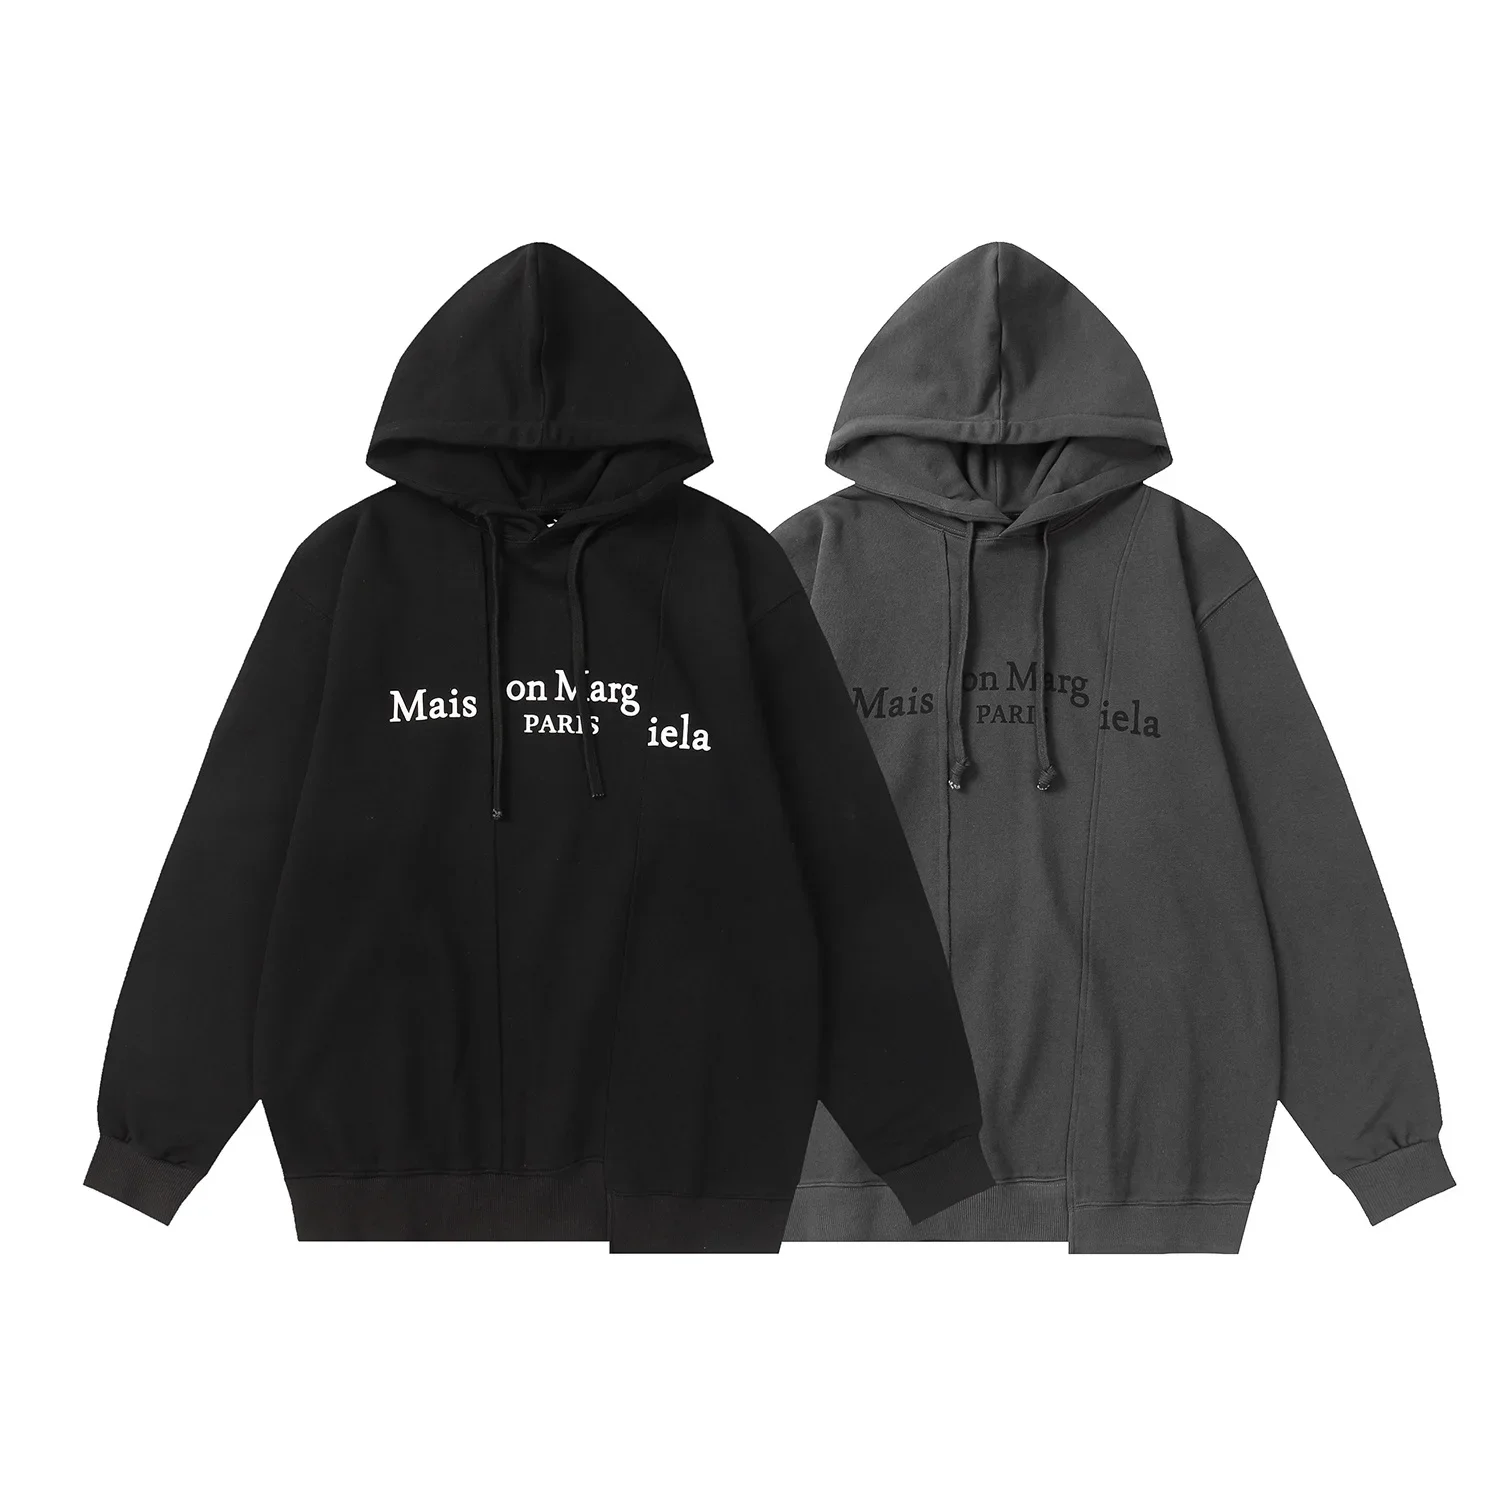 

The new Maison Margiela MM6 is stitched with misplaced men's and women's loose hoodie sweatshirts for autumn and winter